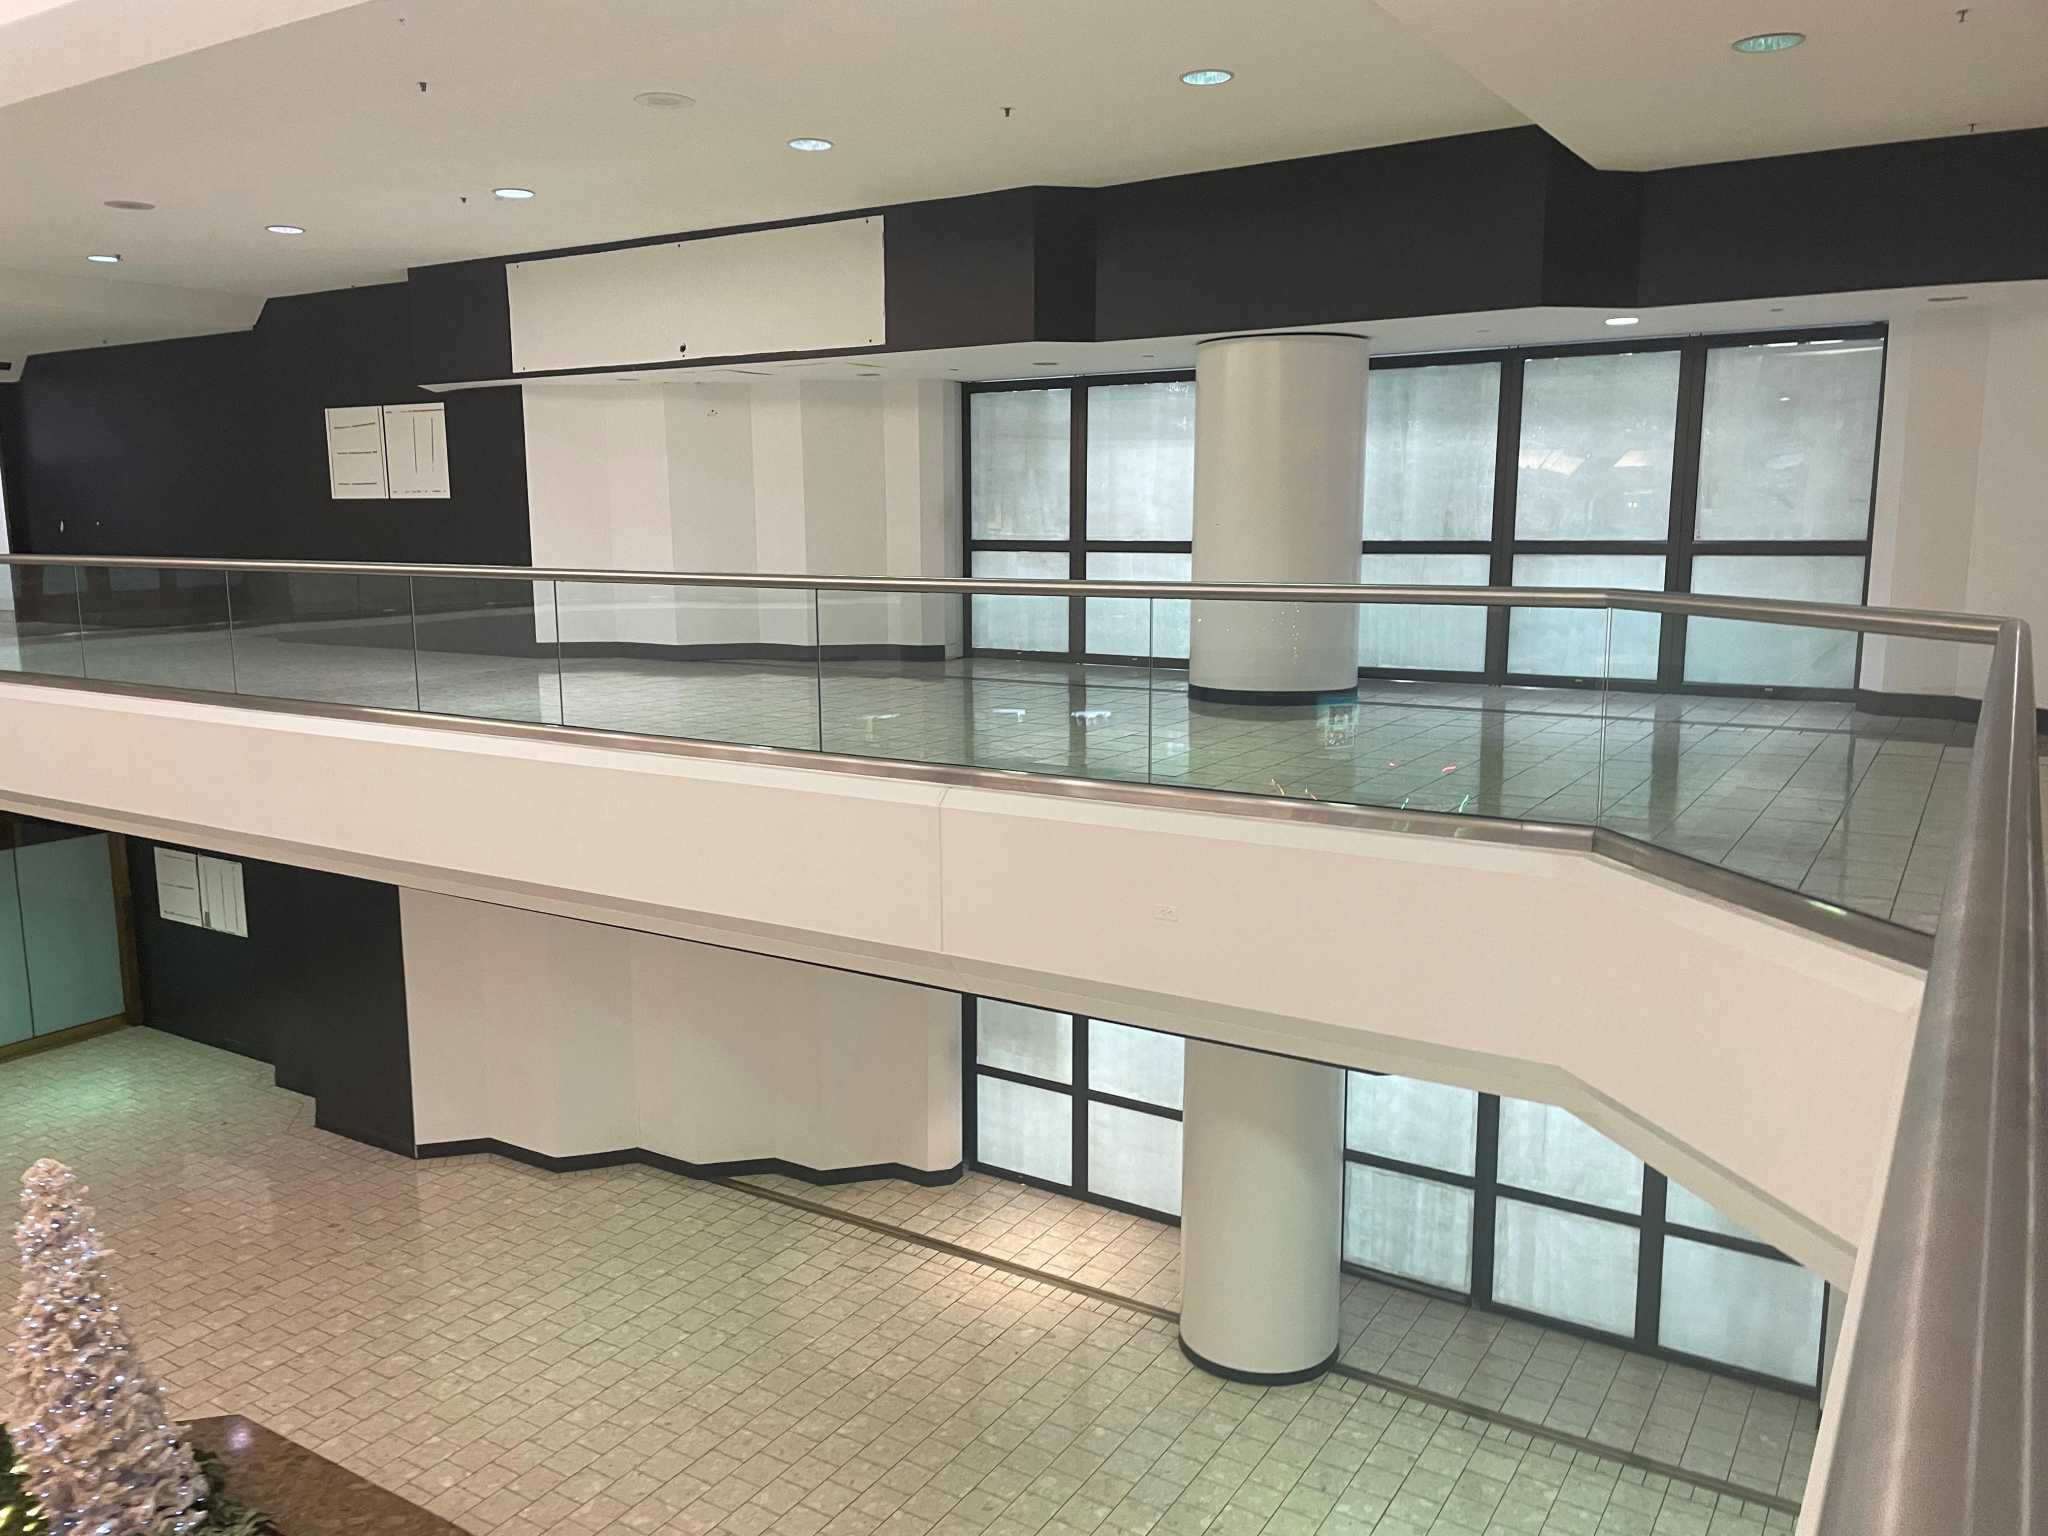 Saks Off 5th to open new Stamford store on High Ridge Road